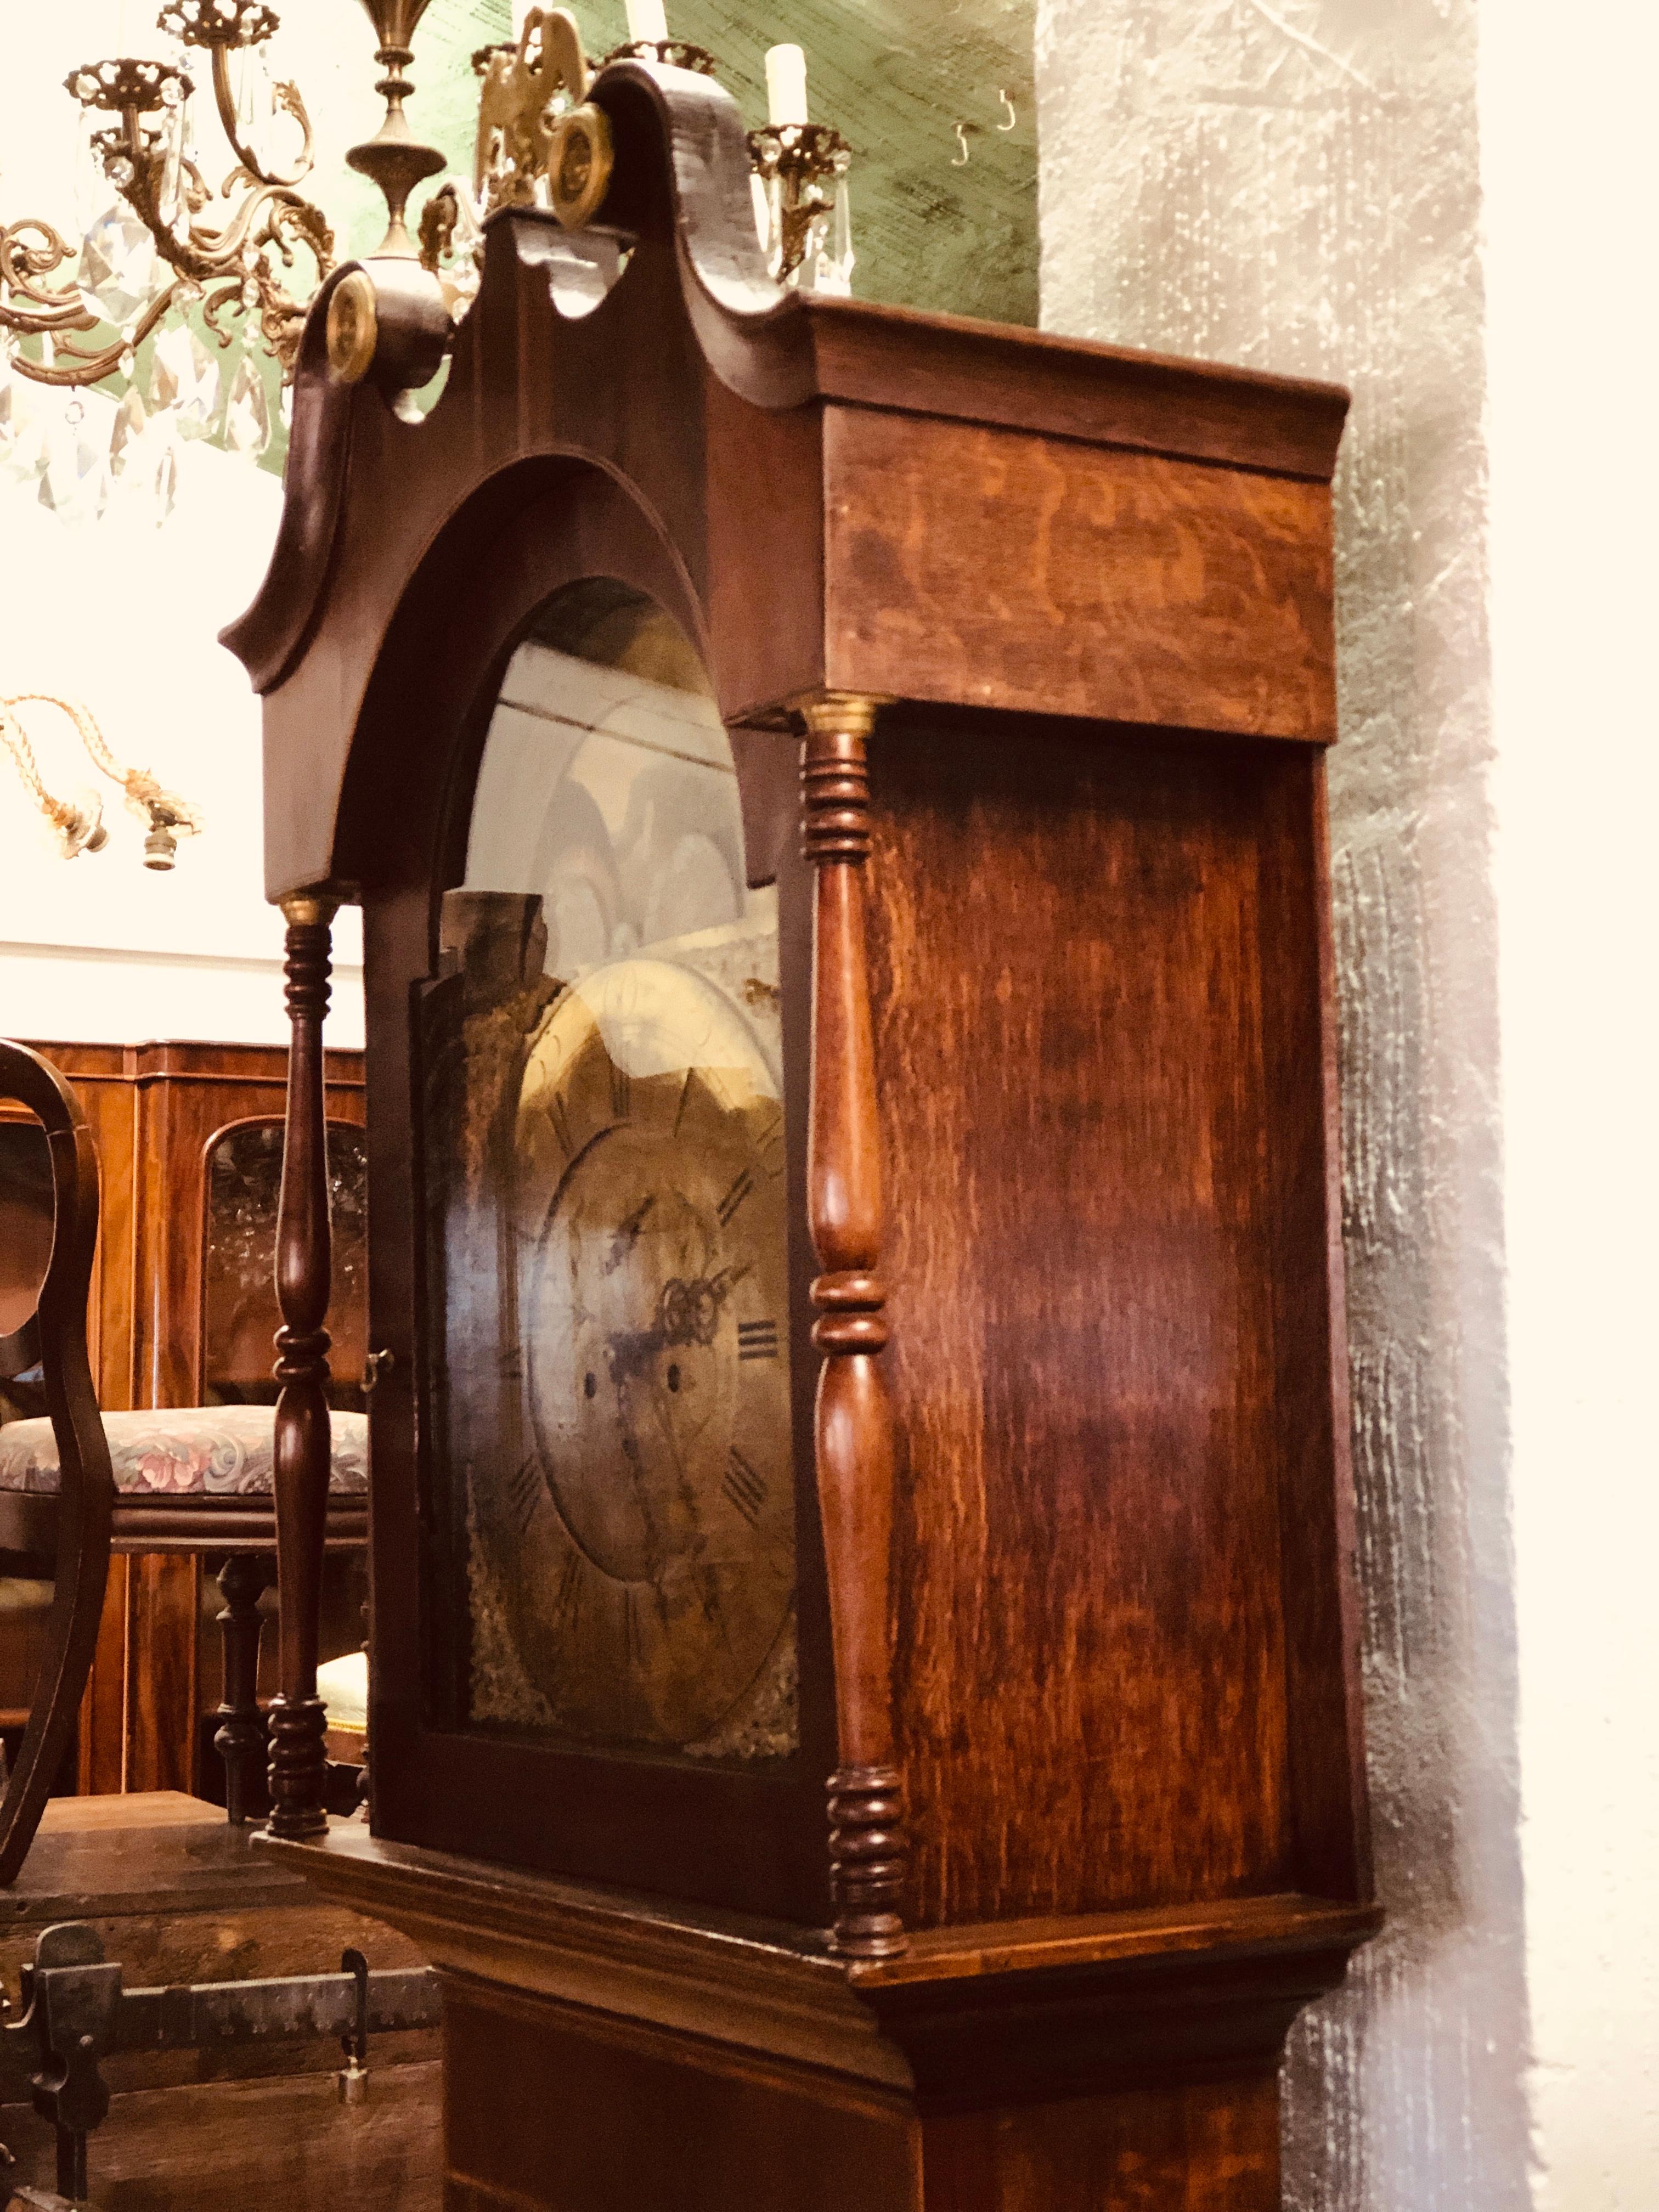 England-Galles grandfather clock, Victorian era, mid-19th century, in oak wood and inlaid in fruit woods. Moon phases, golden bronze dial, working, pendulum and original weights.